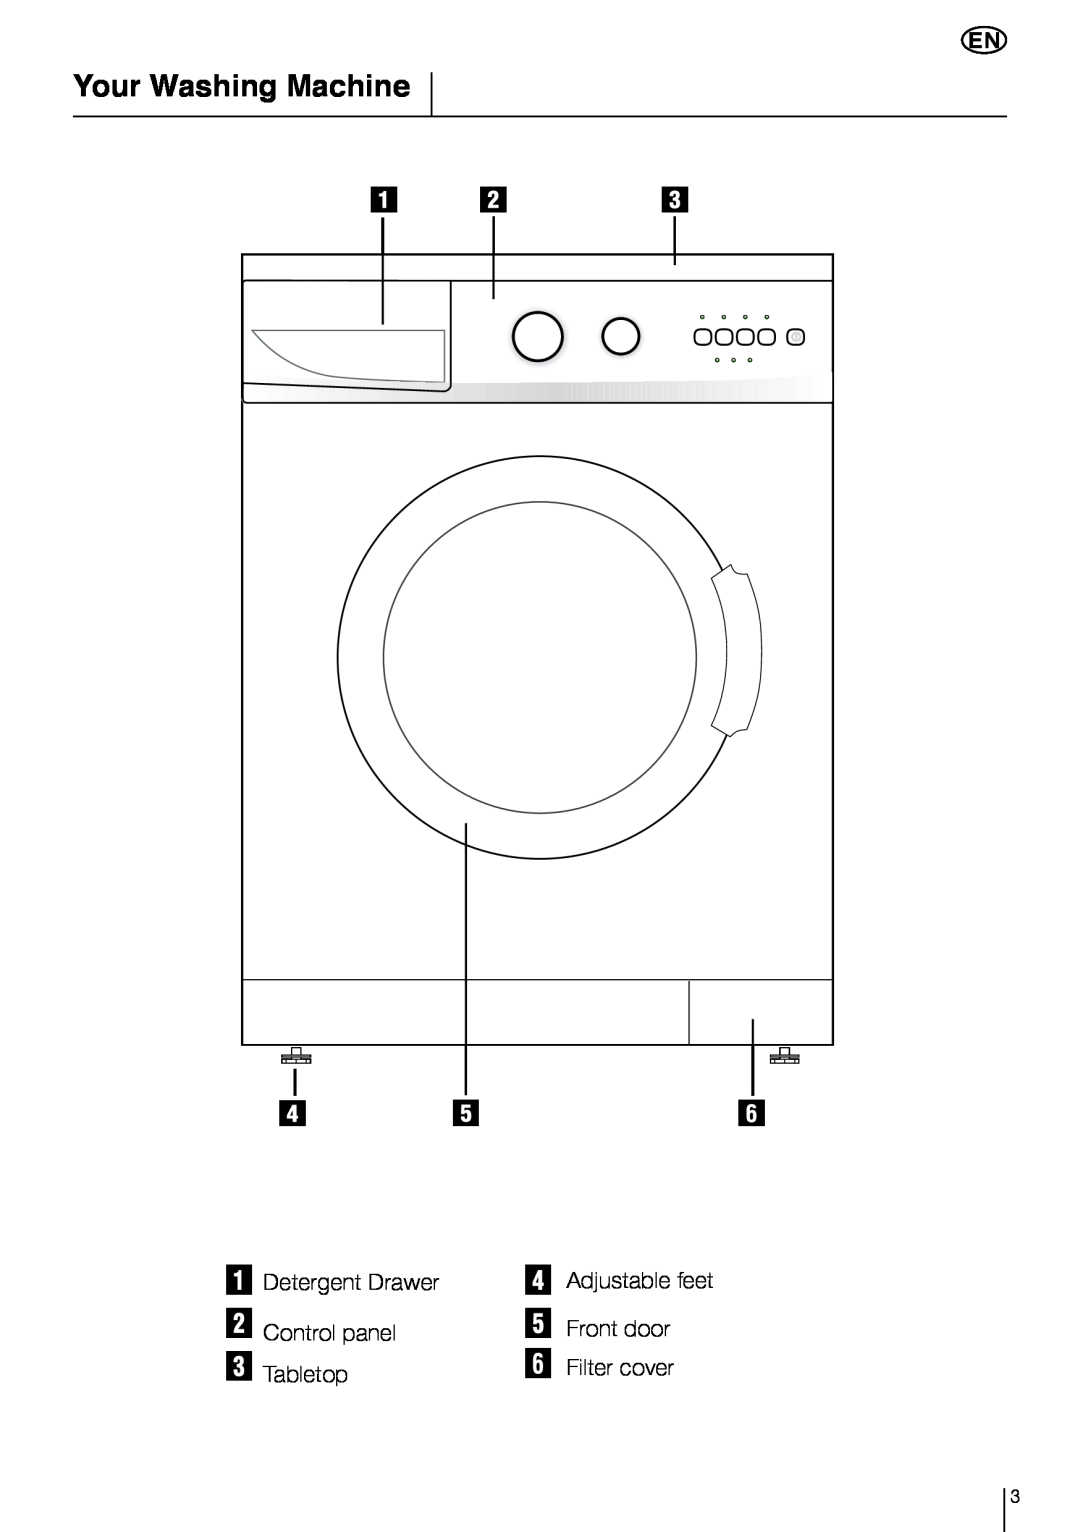 Smeg LBS 635 Your Washing Machine, Detergent Drawer, Control panel, Front door, Tabletop, Filter cover, Adjustable feet 